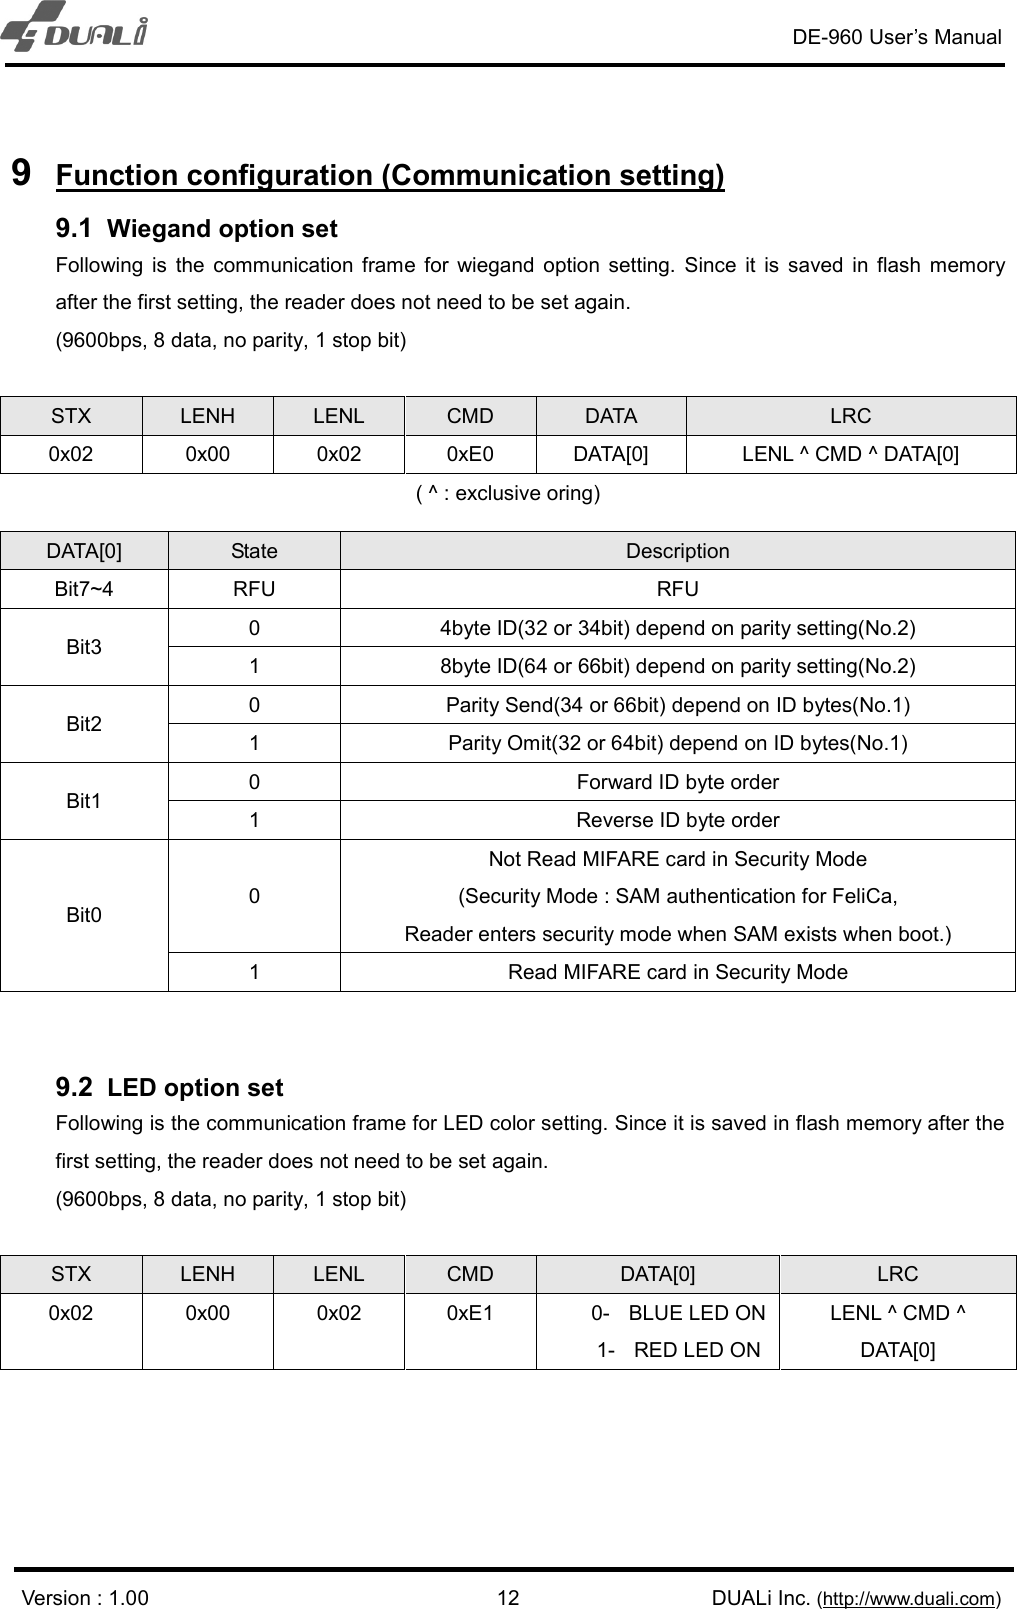 DE-960 User’s Manual   Version : 1.00                                             DUALi Inc. (http://www.duali.com) 129  Function configuration (Communication setting) 9.1   Wiegand option set Following  is  the  communication  frame  for  wiegand  option  setting.  Since  it  is  saved  in  flash  memory after the first setting, the reader does not need to be set again.   (9600bps, 8 data, no parity, 1 stop bit)  STX LENH LENL CMD  DATA  LRC 0x02  0x00  0x02  0xE0  DATA[0]  LENL ^ CMD ^ DATA[0] ( ^ : exclusive oring)  9.2   LED option set Following is the communication frame for LED color setting. Since it is saved in flash memory after the first setting, the reader does not need to be set again.   (9600bps, 8 data, no parity, 1 stop bit)  STX  LENH  LENL  CMD  DATA[0]  LRC 0x02  0x00  0x02  0xE1  0-  BLUE LED ON 1-  RED LED ON LENL ^ CMD ^ DATA[0]     DATA[0]  State  Description Bit7~4  RFU  RFU Bit3  0  4byte ID(32 or 34bit) depend on parity setting(No.2) 1  8byte ID(64 or 66bit) depend on parity setting(No.2) Bit2  0  Parity Send(34 or 66bit) depend on ID bytes(No.1) 1  Parity Omit(32 or 64bit) depend on ID bytes(No.1) Bit1  0  Forward ID byte order 1  Reverse ID byte order Bit0  0 Not Read MIFARE card in Security Mode (Security Mode : SAM authentication for FeliCa, Reader enters security mode when SAM exists when boot.) 1  Read MIFARE card in Security Mode 